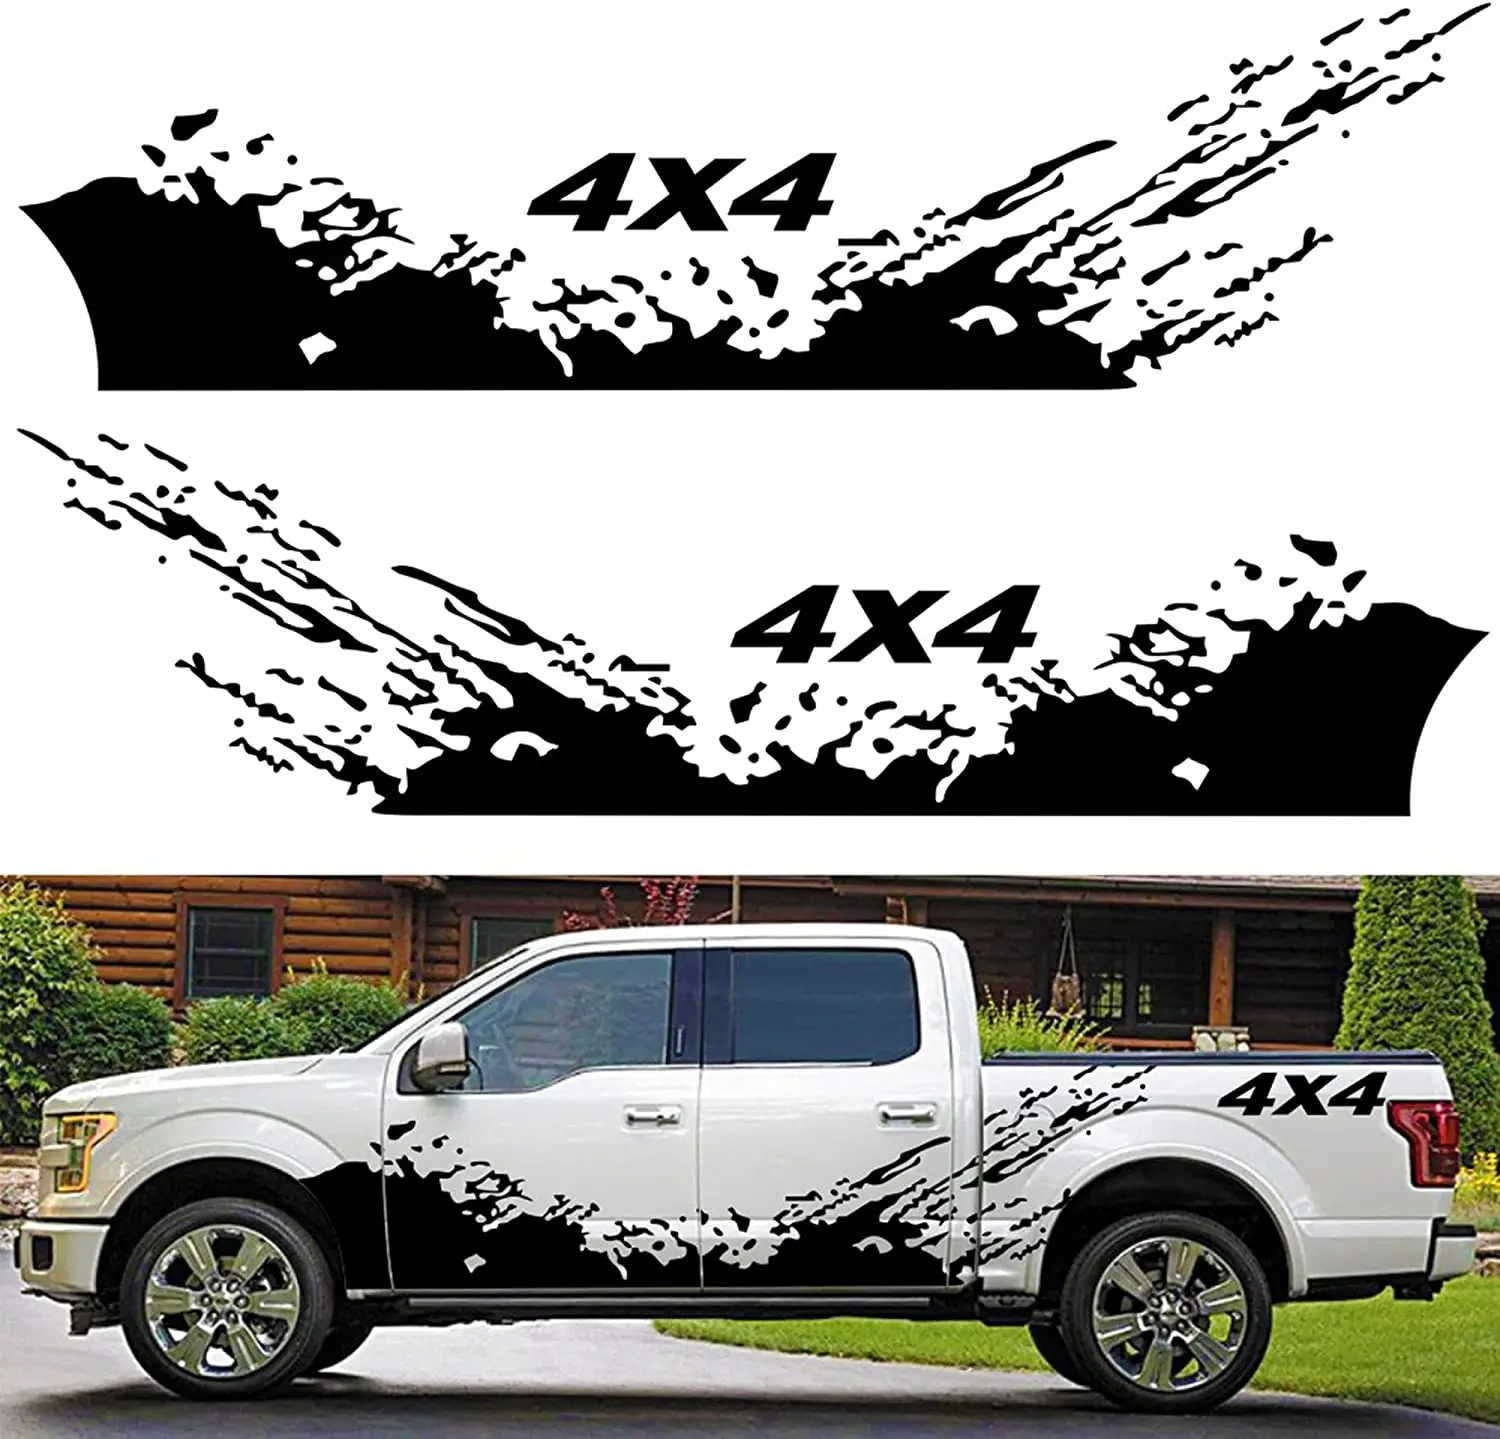 

Fochutech Truck Car Stickers Large Car Side Decals for Truck Pickup SUV Jeep Racing Stripes Car Stickers 4x4 Waves Graphics